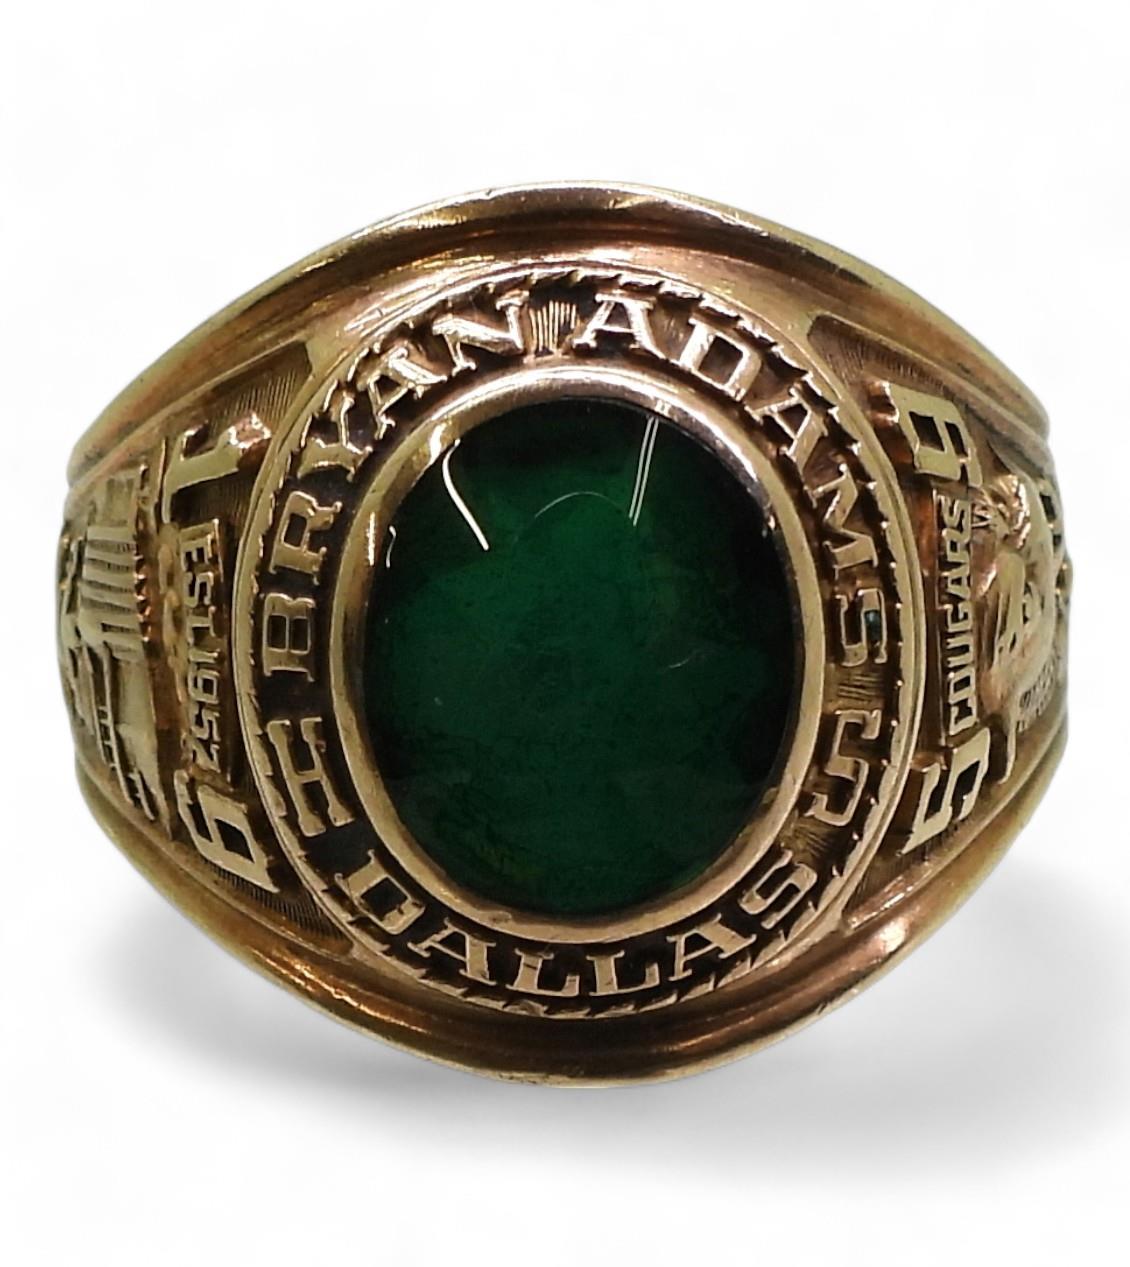 A 10k gold American college ring, for Bryan Adams High School Dallas 1959 Cougars, size Gents size